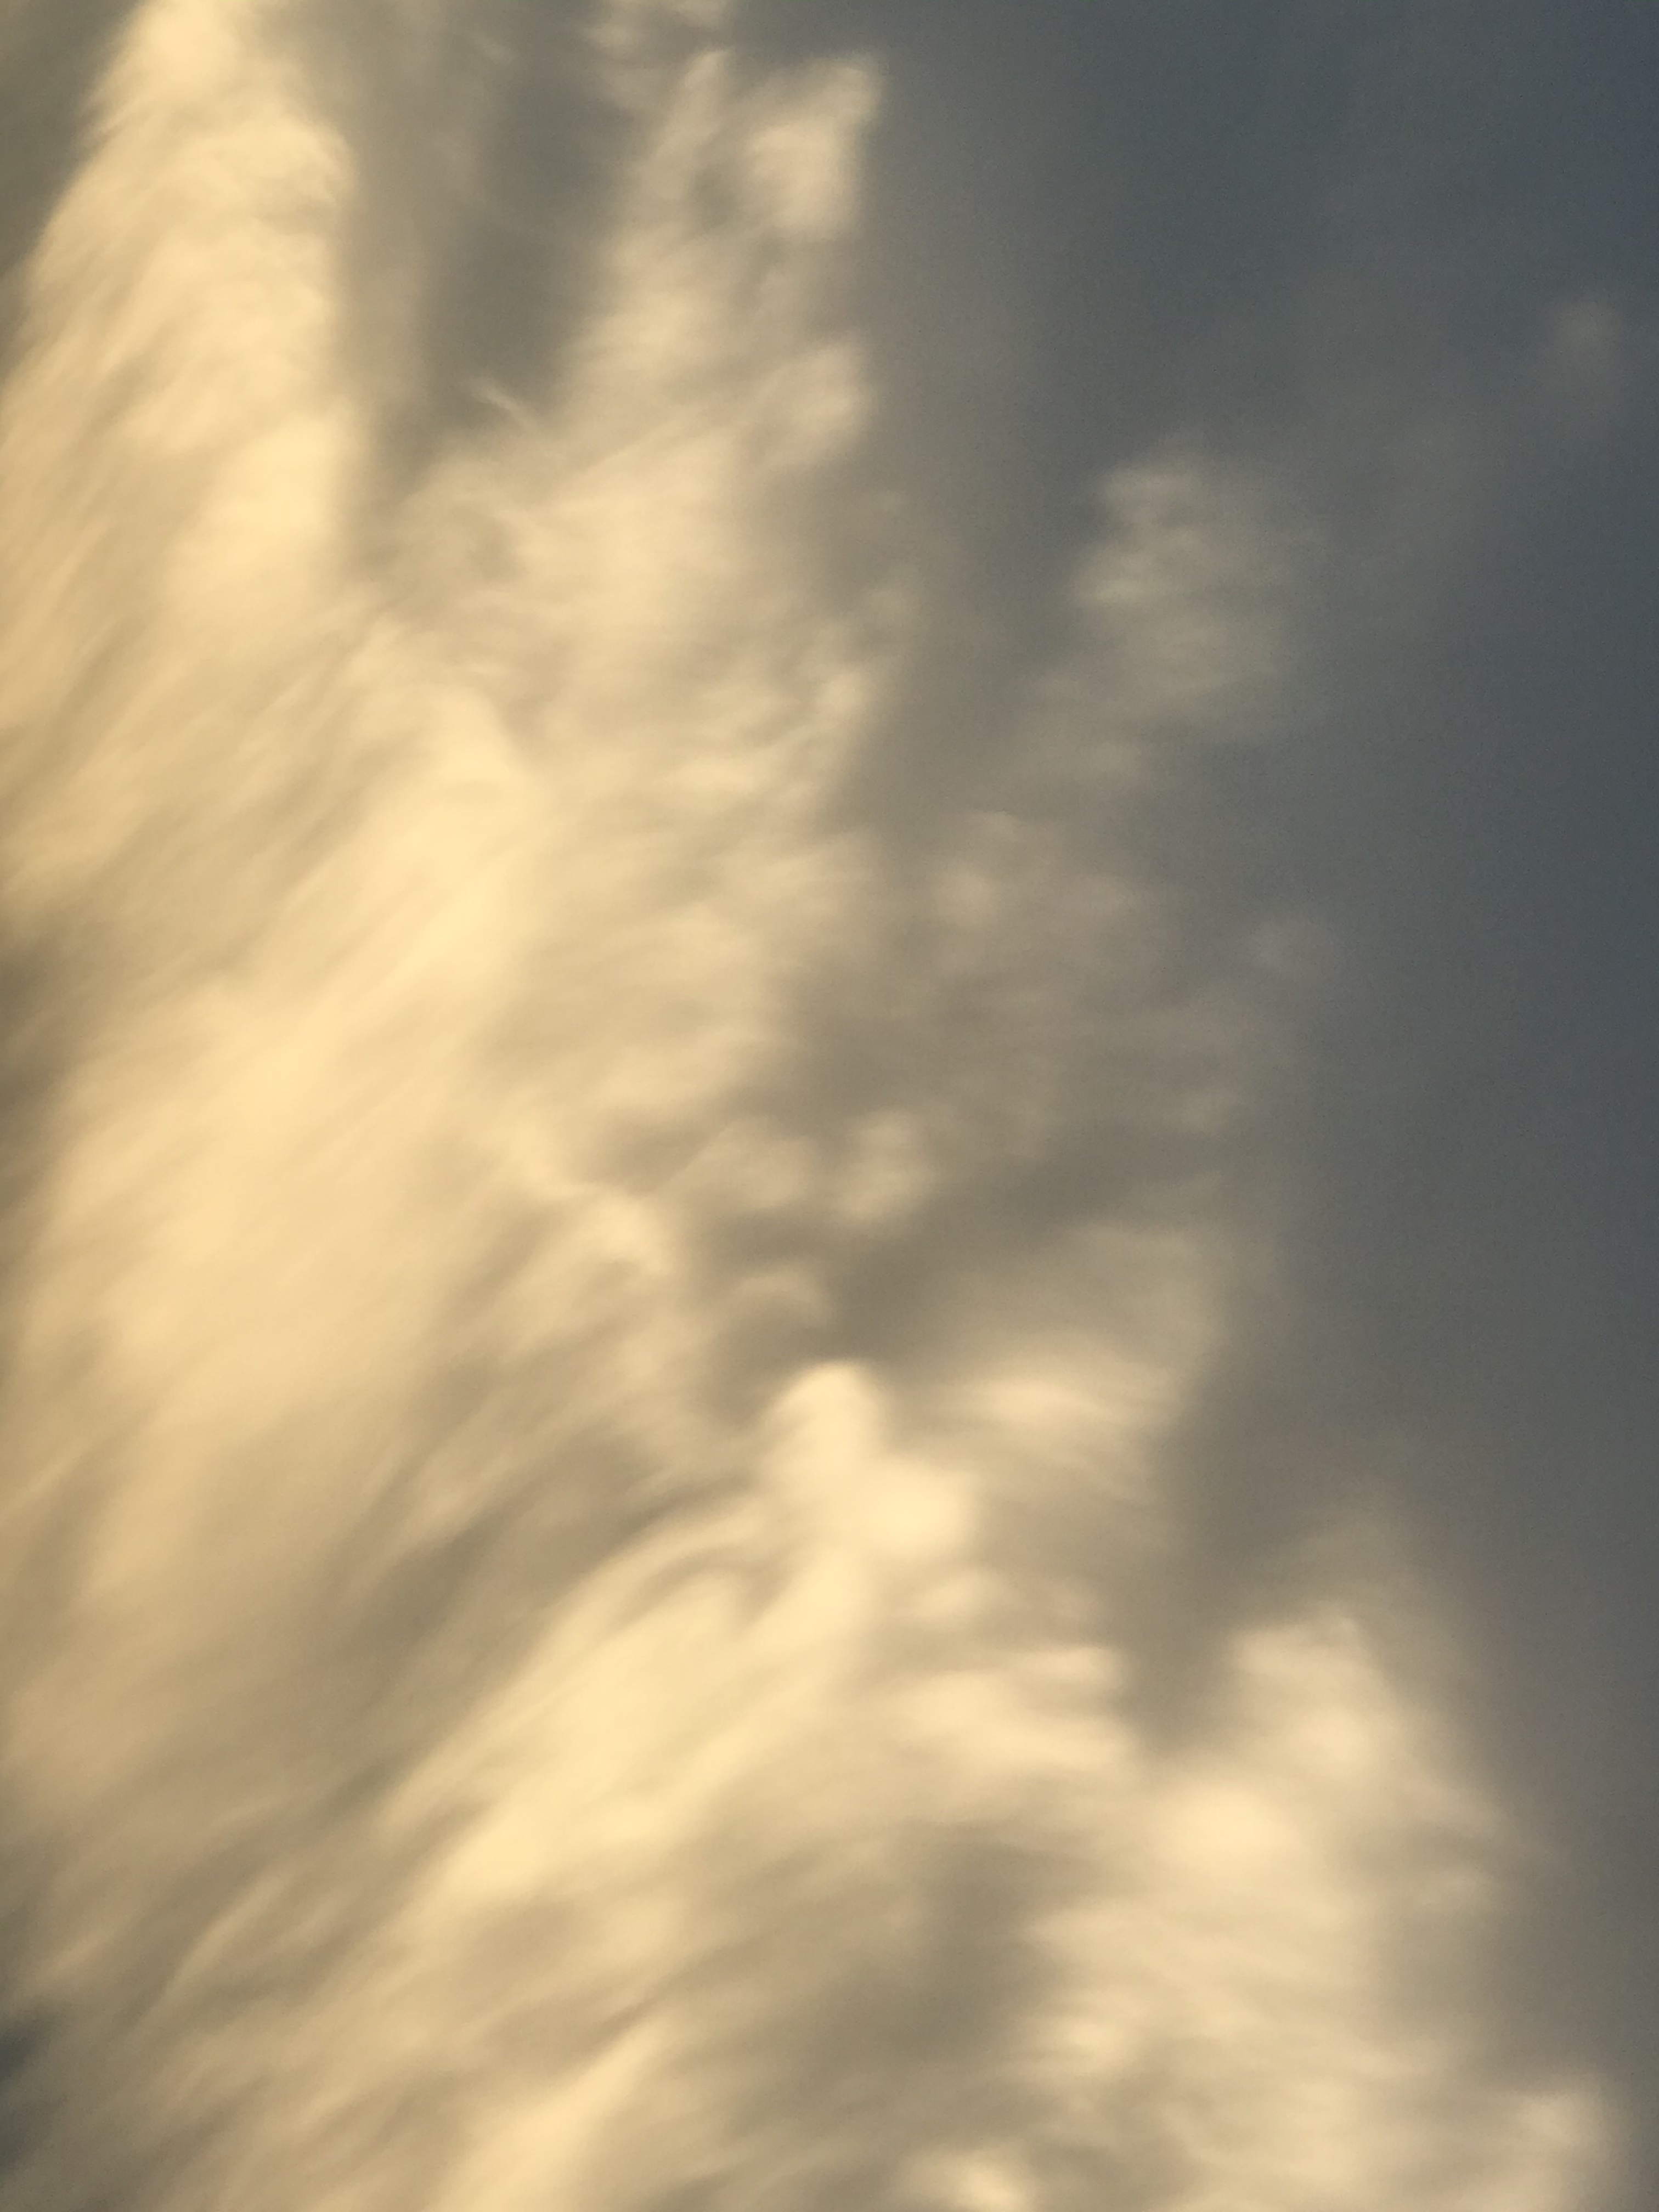 A photograph of clouds that appear to be falling.